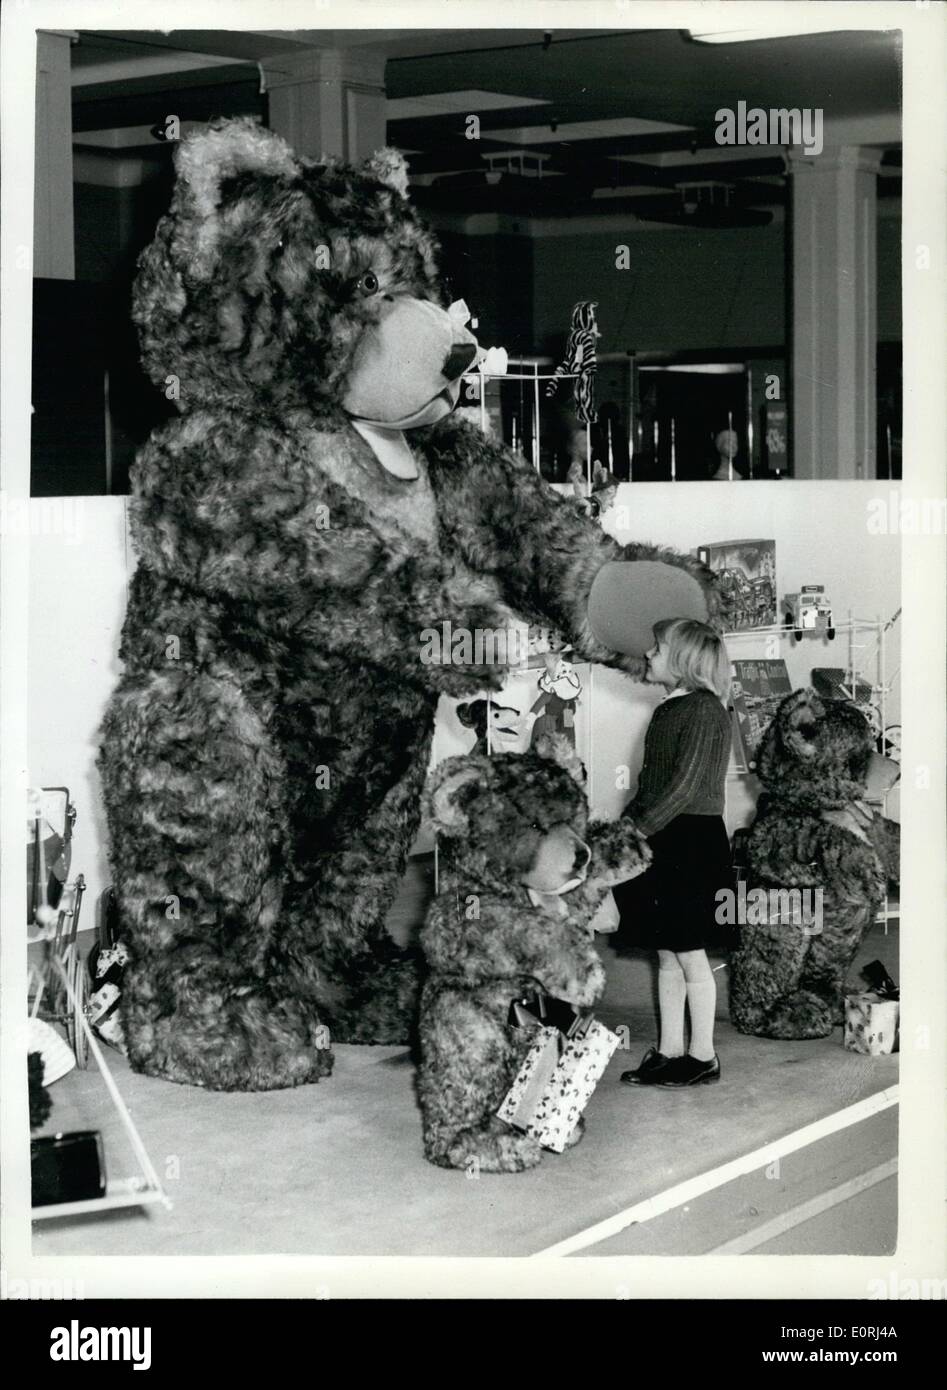 Nov. 11, 1959 - Janet And The Giant Teddy Hear: Little seven-years old Janet Bone, of Coulsdon, Surrey, seen almost warfare by this giant Teddy bear, which is now show at Bentall's store,. Kingston. Stock Photo